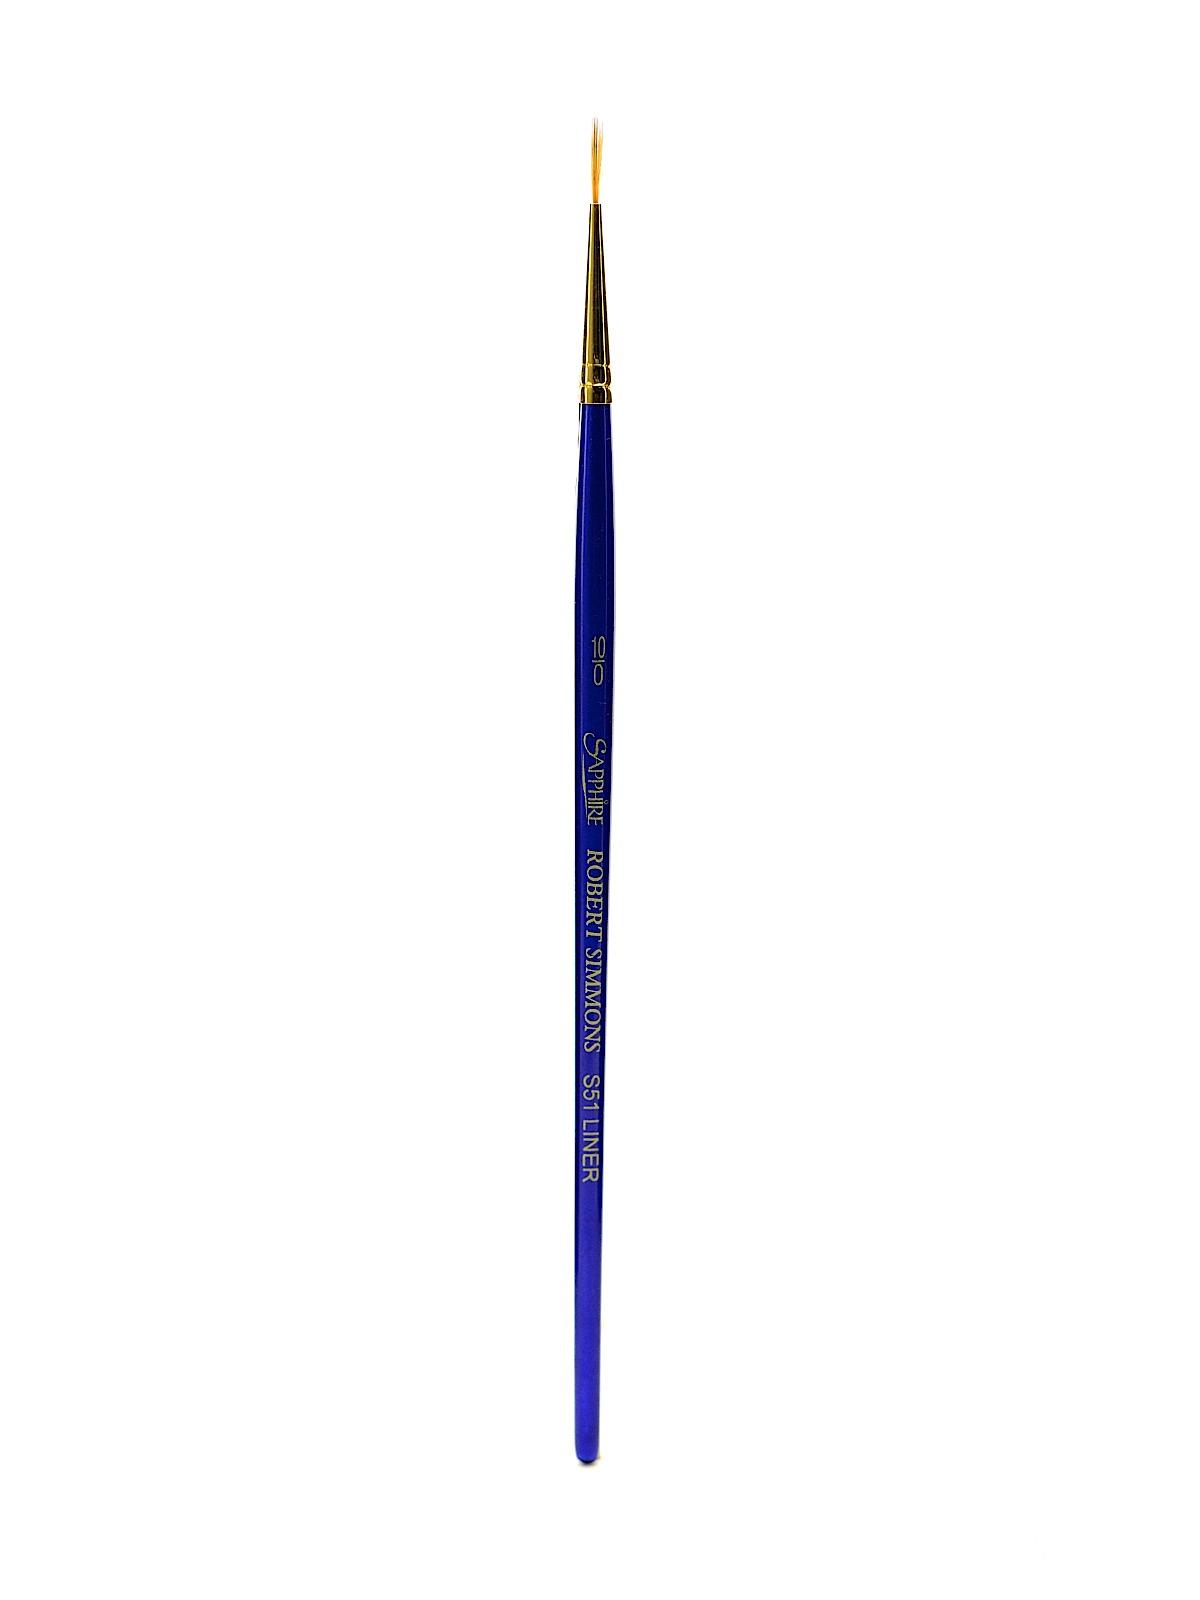 Sapphire Series Synthetic Brushes Short Handle 10 0 Liner S51